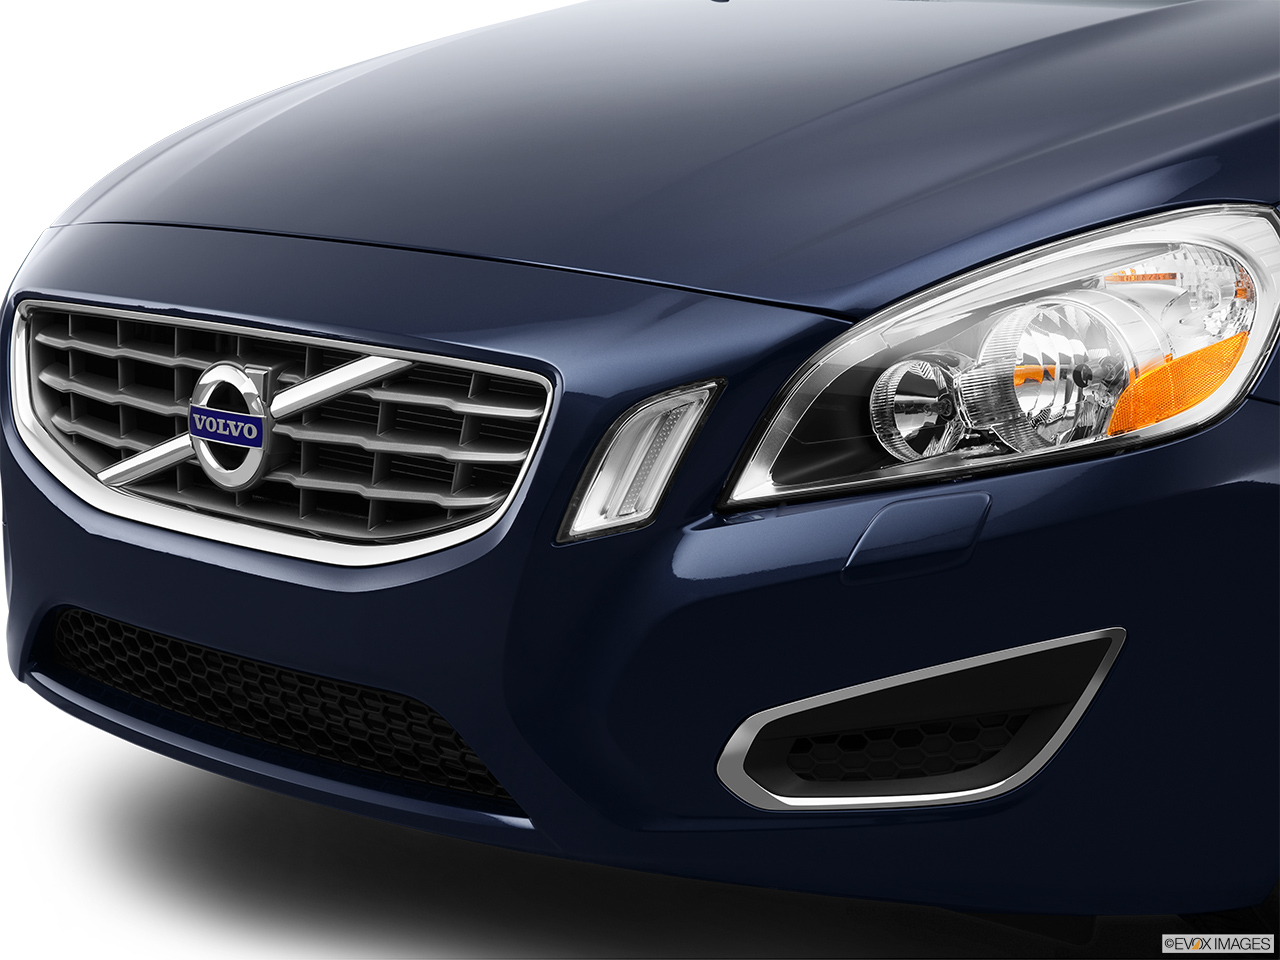 2013 Volvo S60 T5 FWD Premier Close up of Grill. 